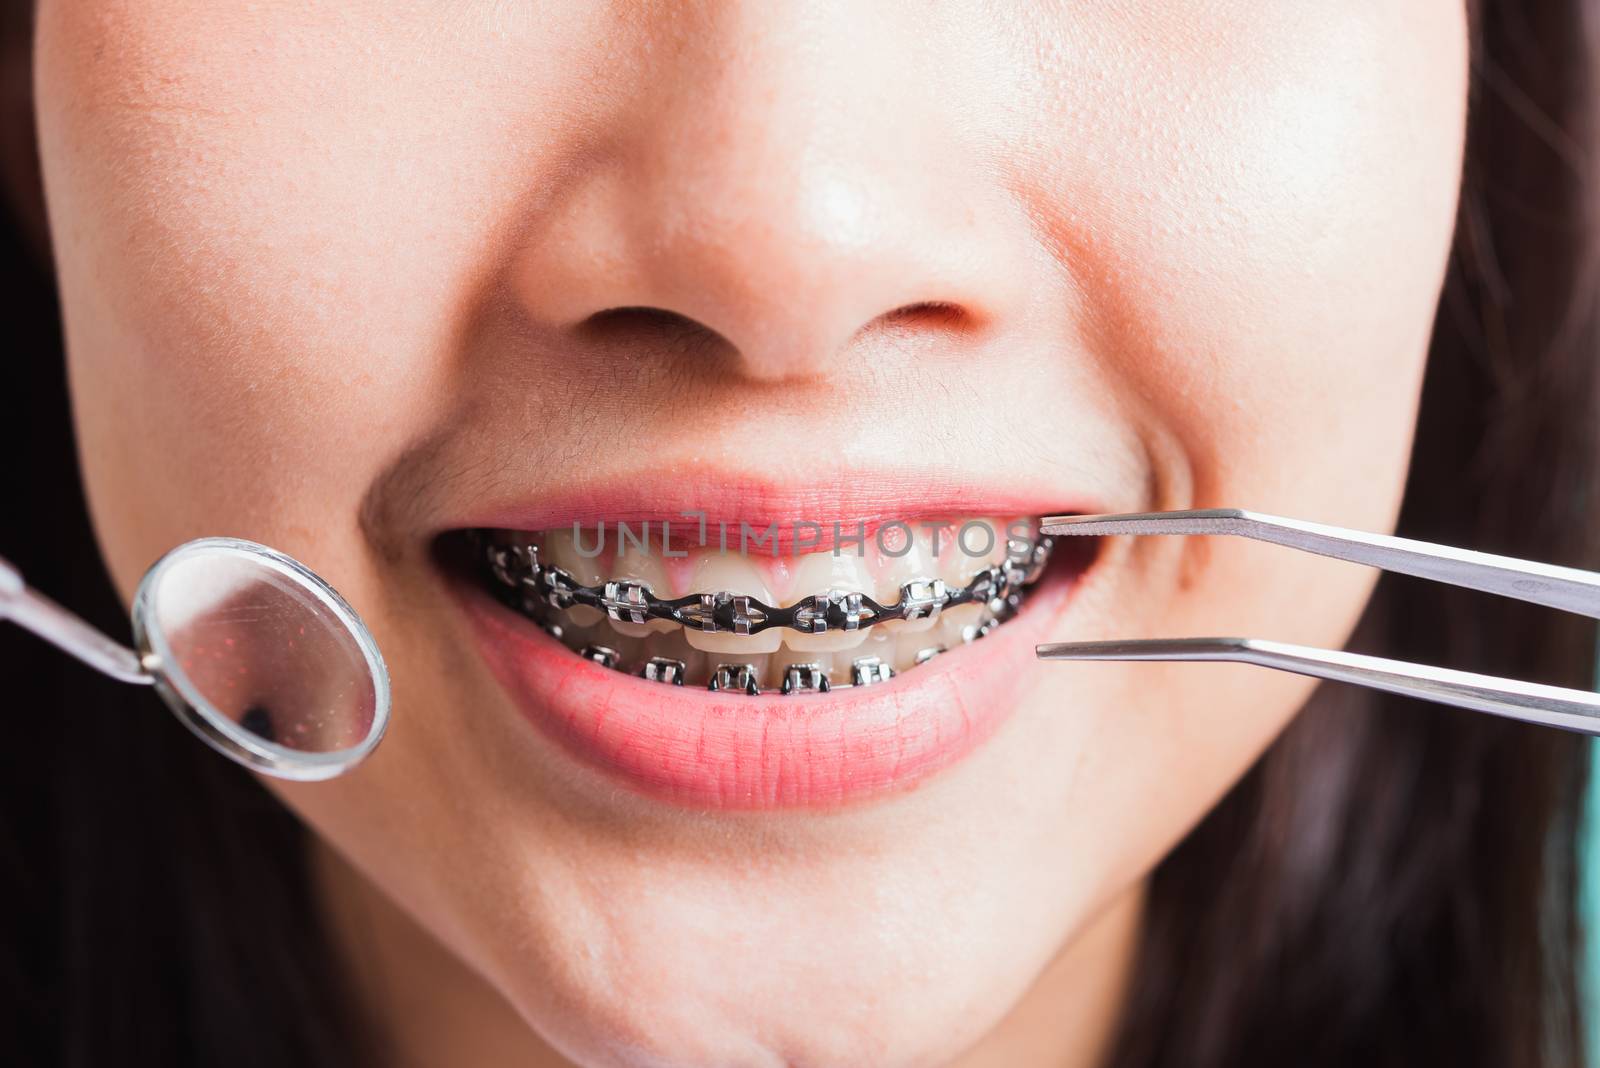 Asian teen beautiful young woman smile have dental braces on teeth laughing and have medical equipment tools for check tooth, isolated on a blue background, Medicine and dentistry concept